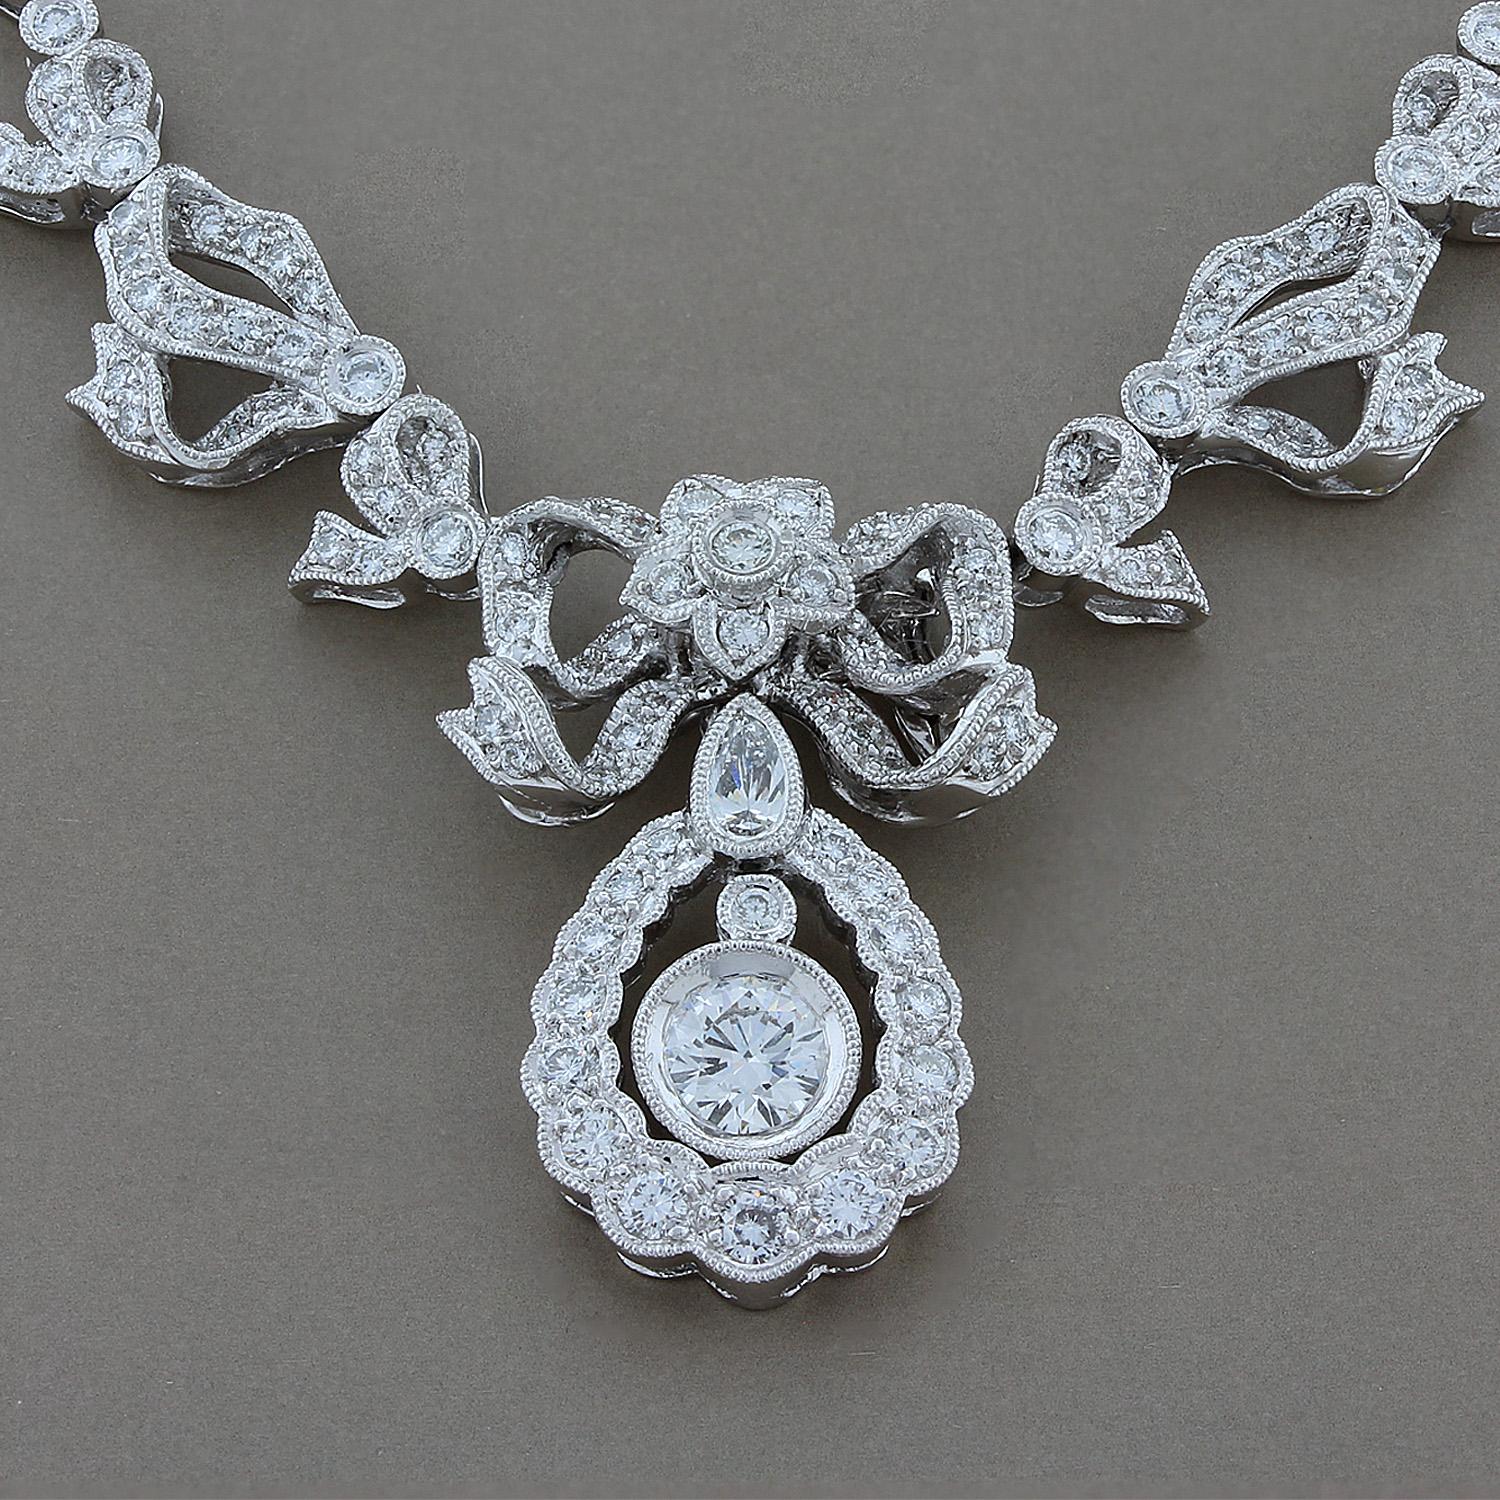 A lovely necklace designed with influences from the Edwardian Era, with detailed filigree and milgrain settings. The necklace features a 0.55 carat round cut diamond with VVS clarity and E-F color, top top grades, with 3.12 carats of smaller